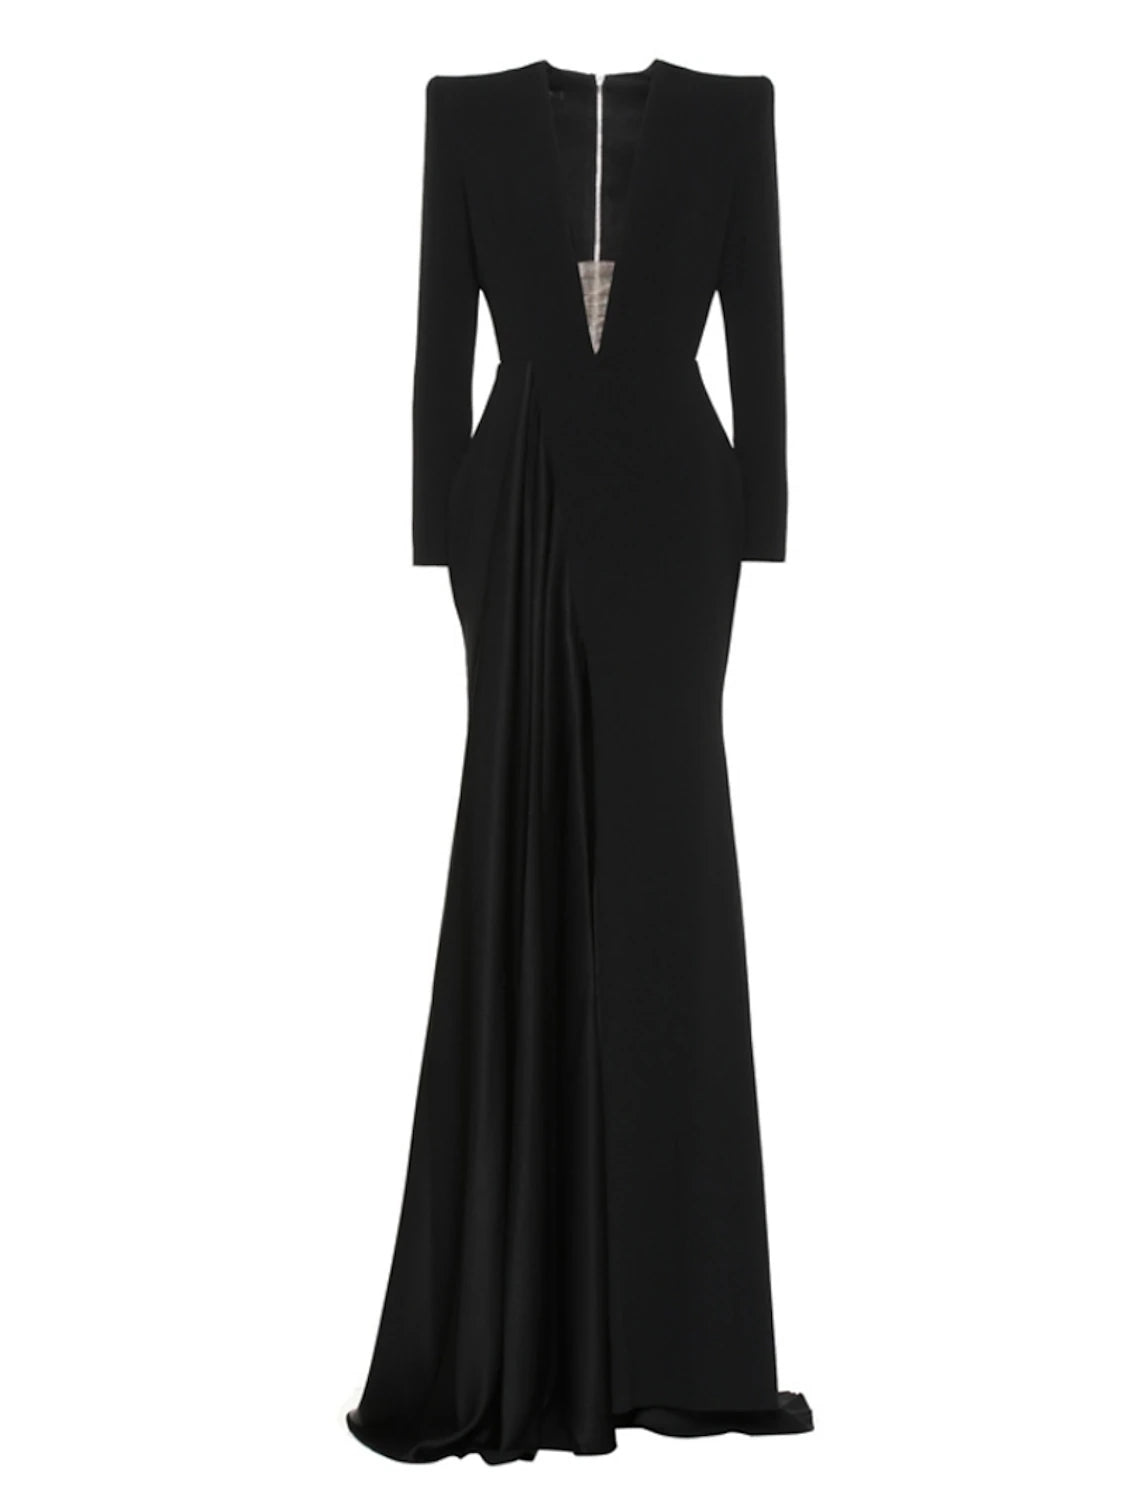 A-Line Evening Gown Elegant Black Champagne Dress Plus Size Dress Formal Sweep / Brush Train Long Sleeve V Neck Stretch Fabric with Pleats Slit